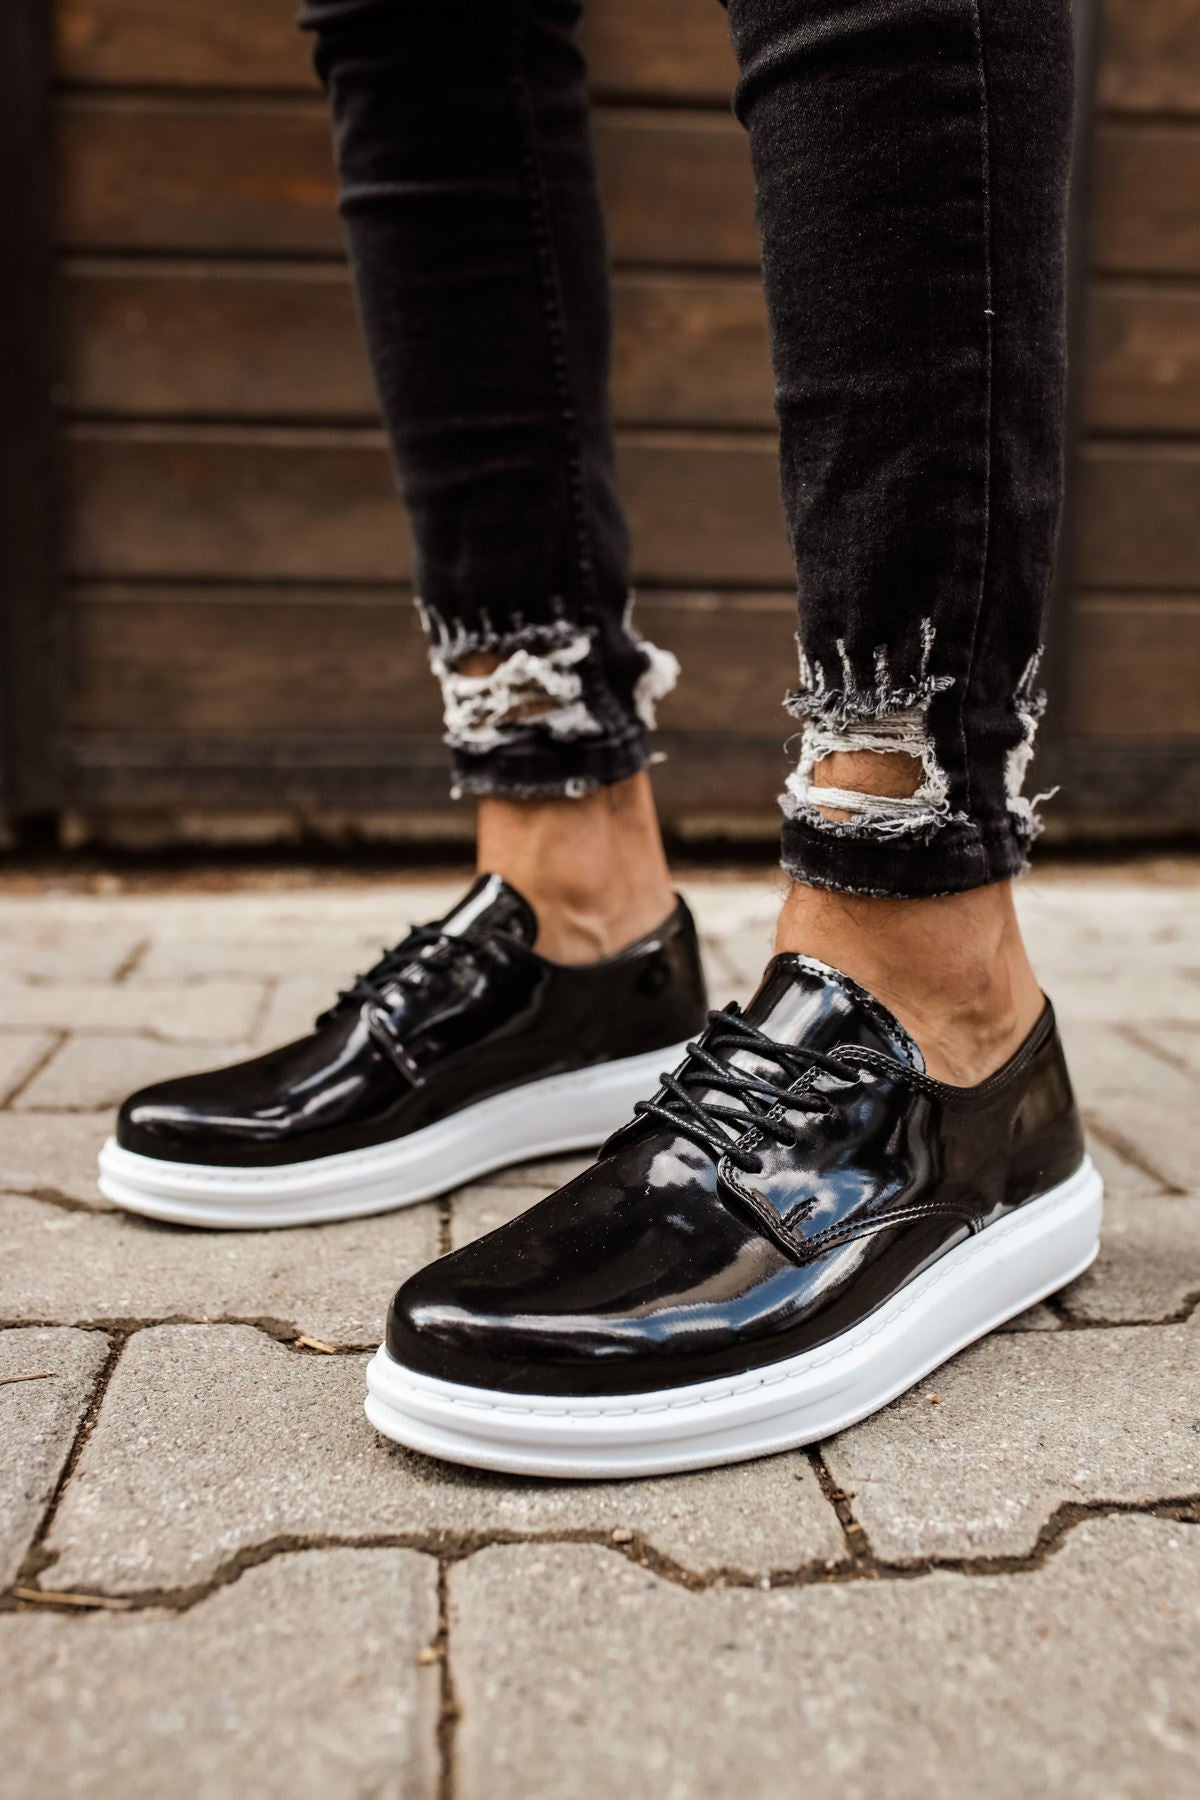 CH003 Men's Black-White Sole Patent Leather Casual Classic Shoes - STREETMODE™